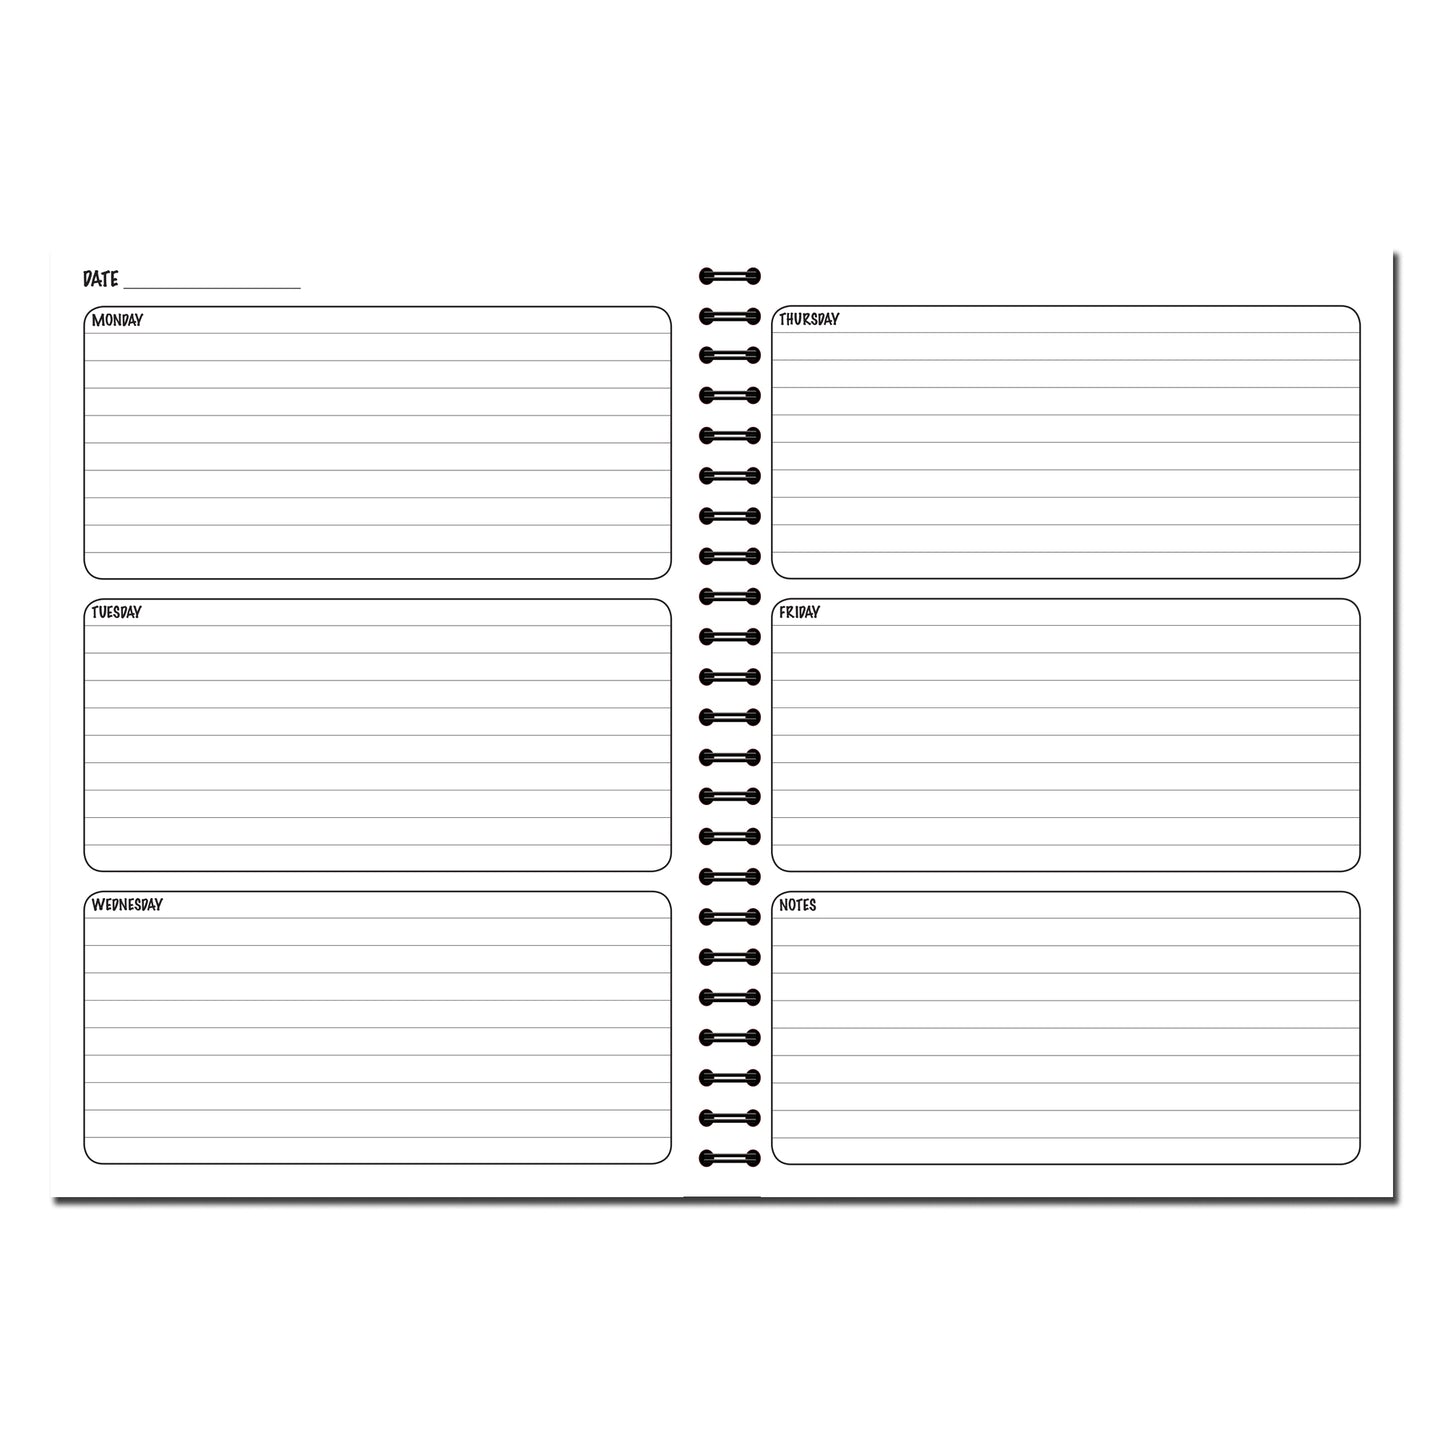 Teachers Planner 2022-2023 | Weekly Lesson Planner | 40 week to view undated pages | A5 | 60 double sided pages Wirobound